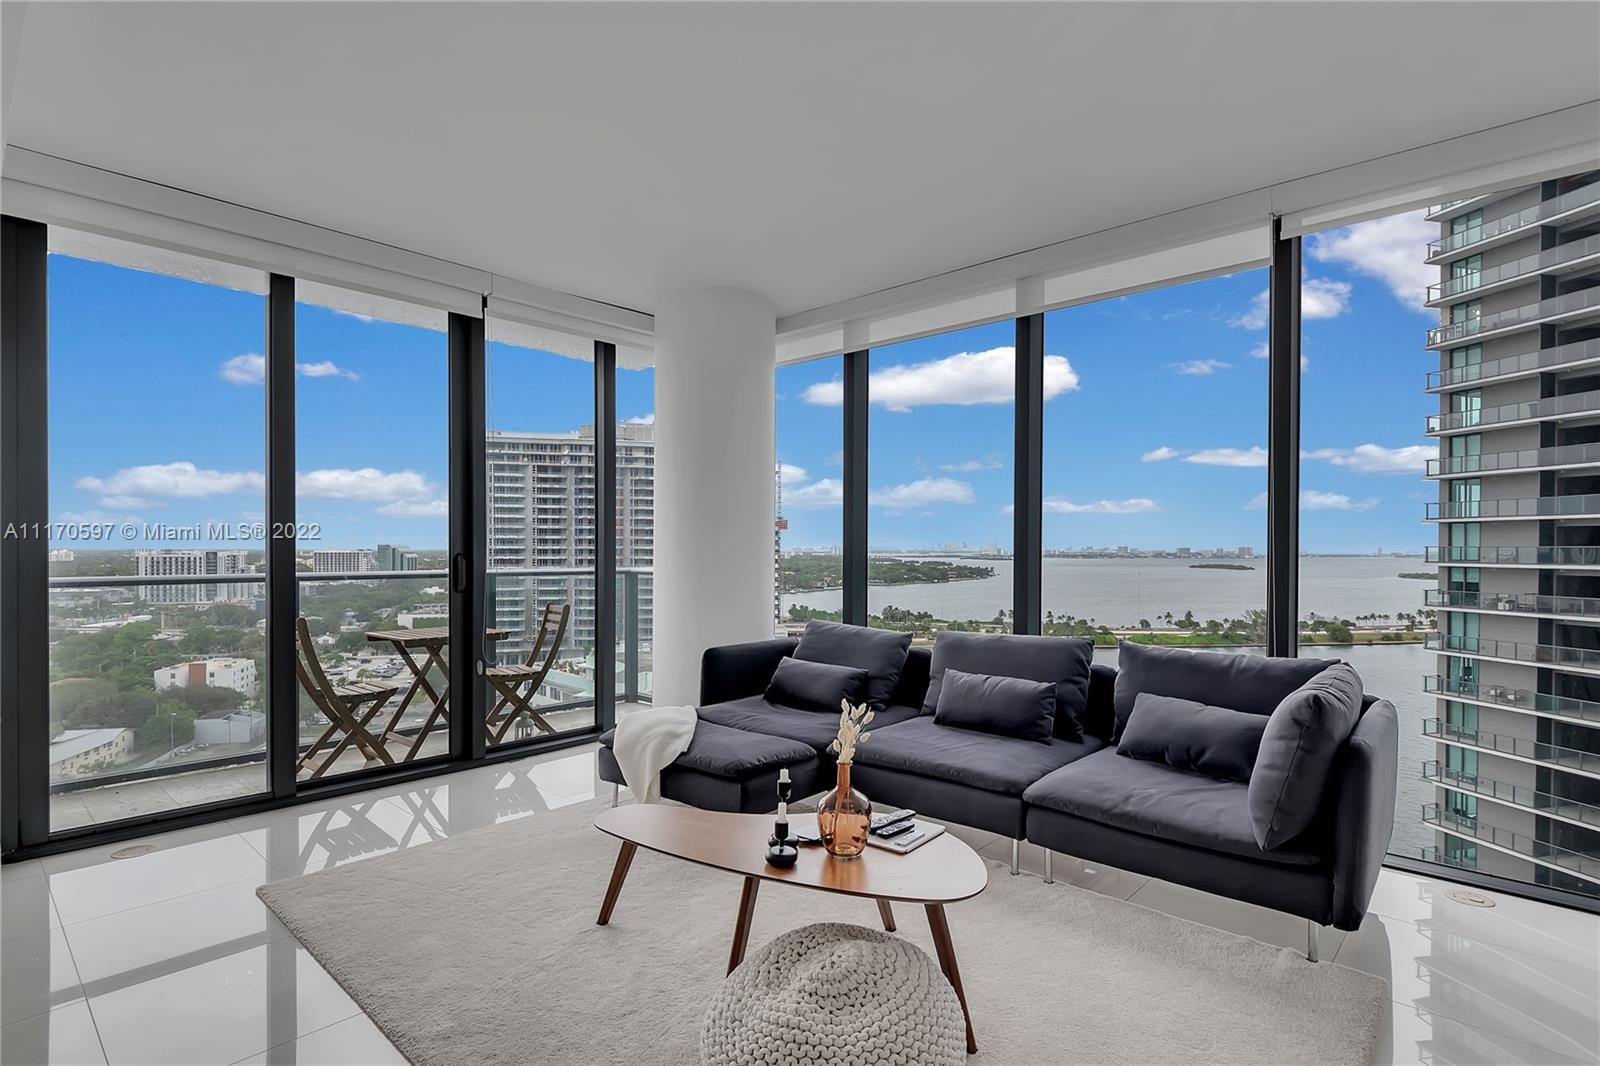 Beautiful corner residence with an abundance of natural light, and beautiful views of the Bay in Edg